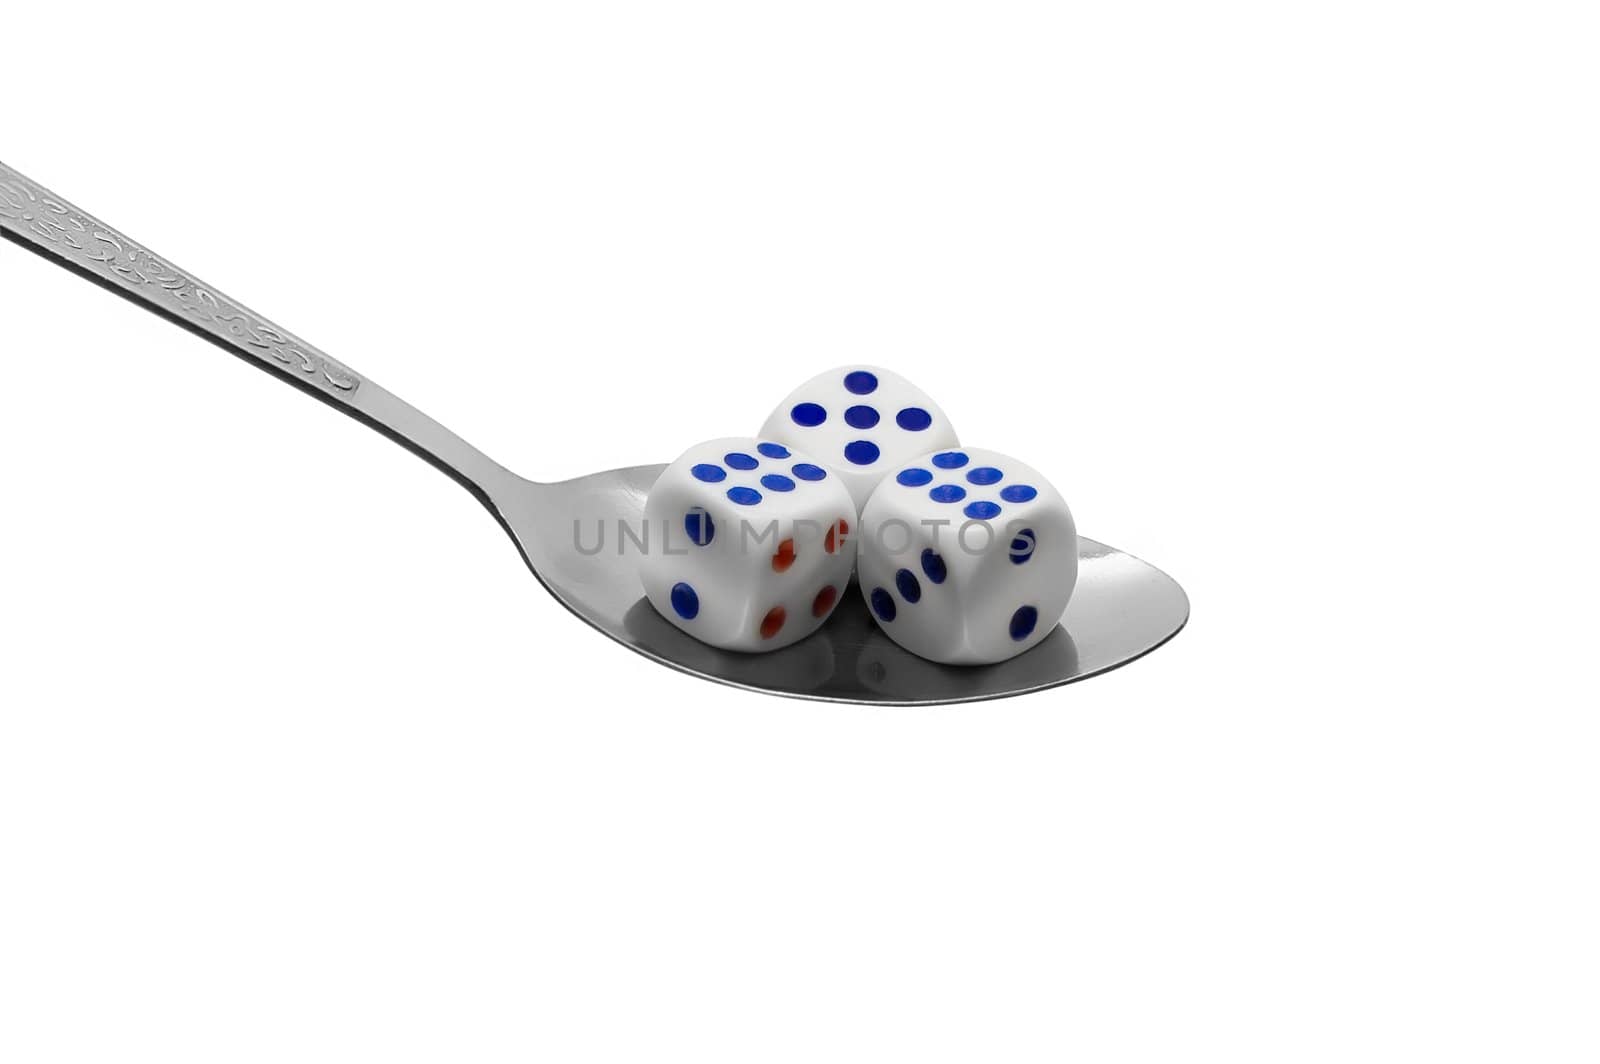 Metal spoon with dices by rusak